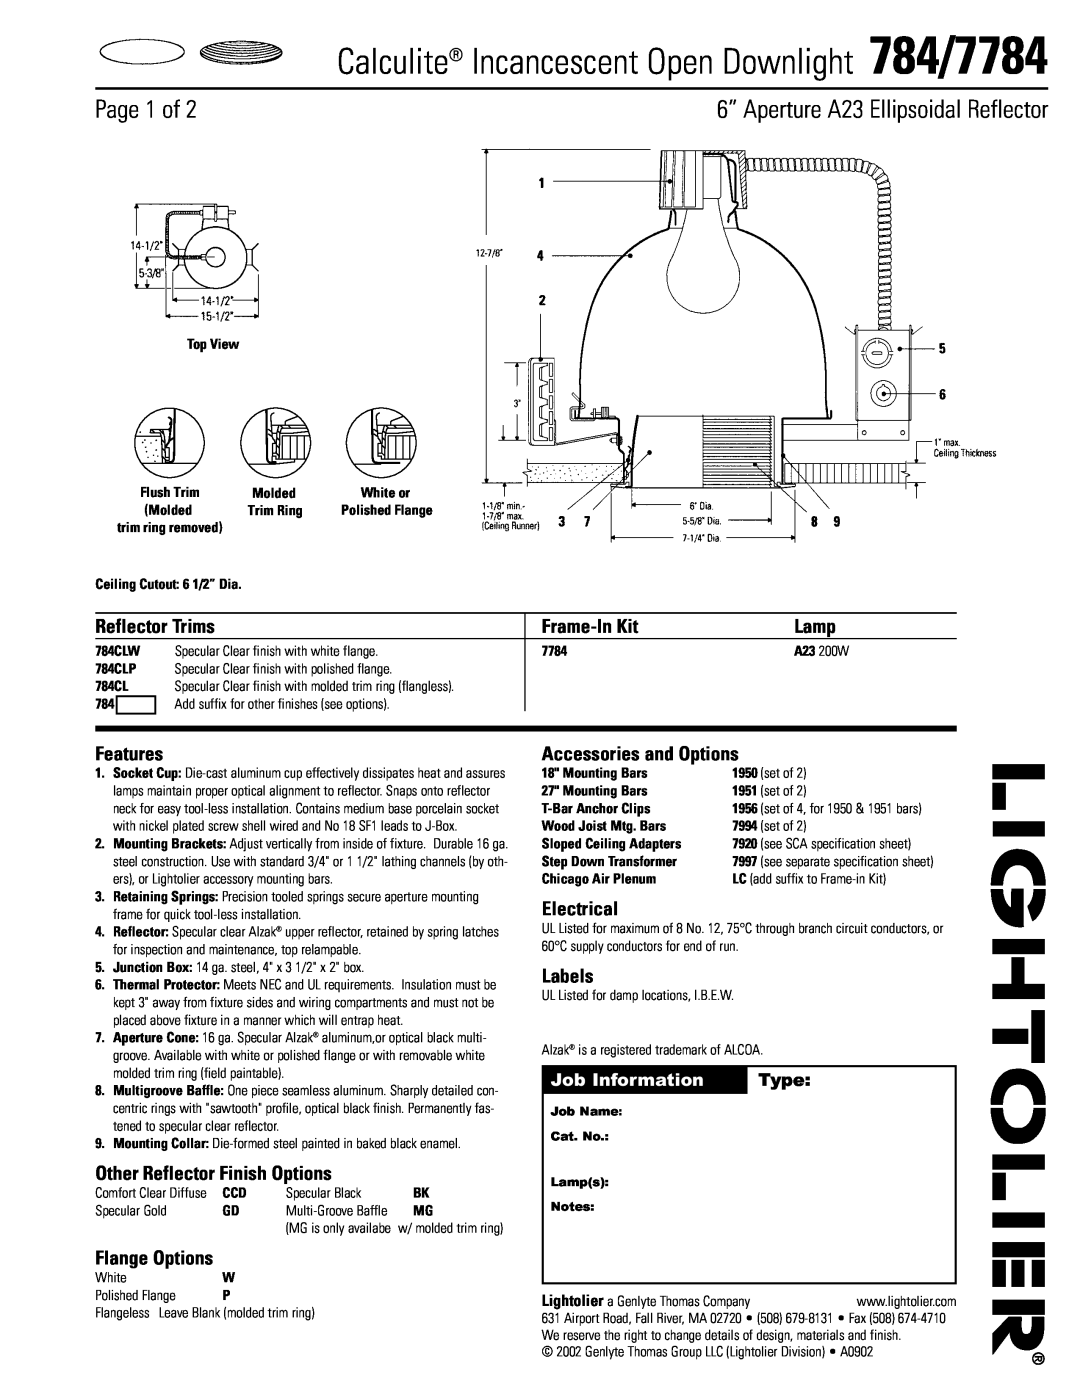 Lightolier specifications Calculite Incancescent Open Downlight 784/7784, Page 1 of, Job Information, Type, Frame-InKit 